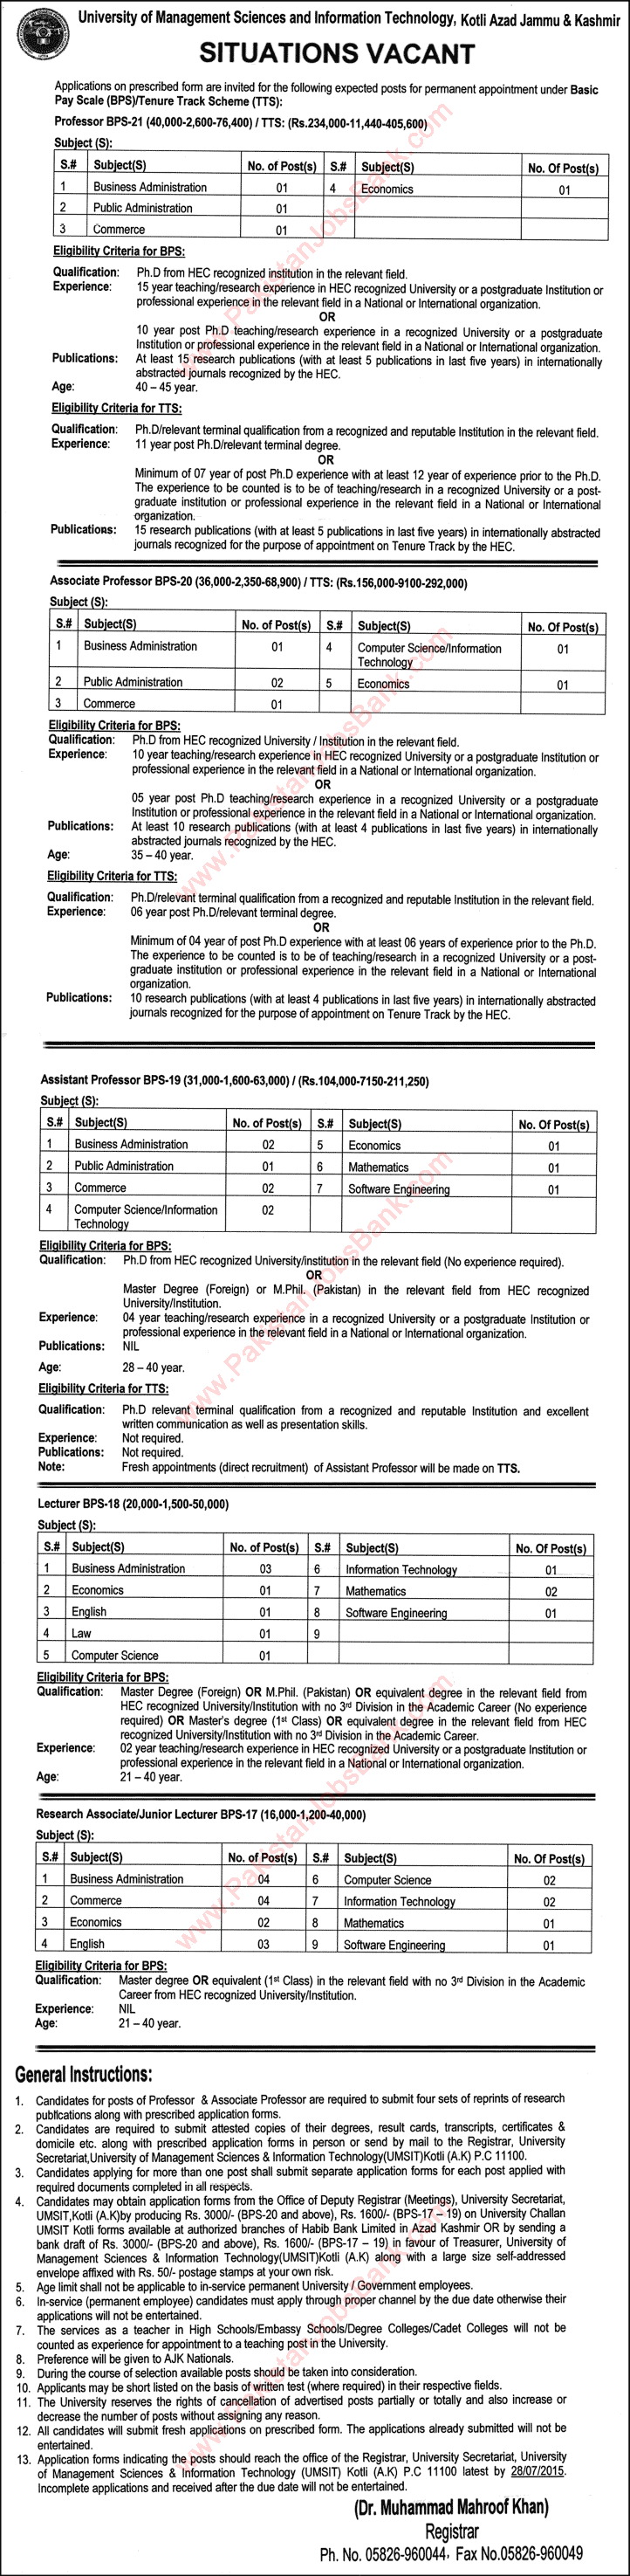 UMSIT Kotli AJK Jobs 2015 June / July Teaching Faculty / Professors / Lecturers Latest / New